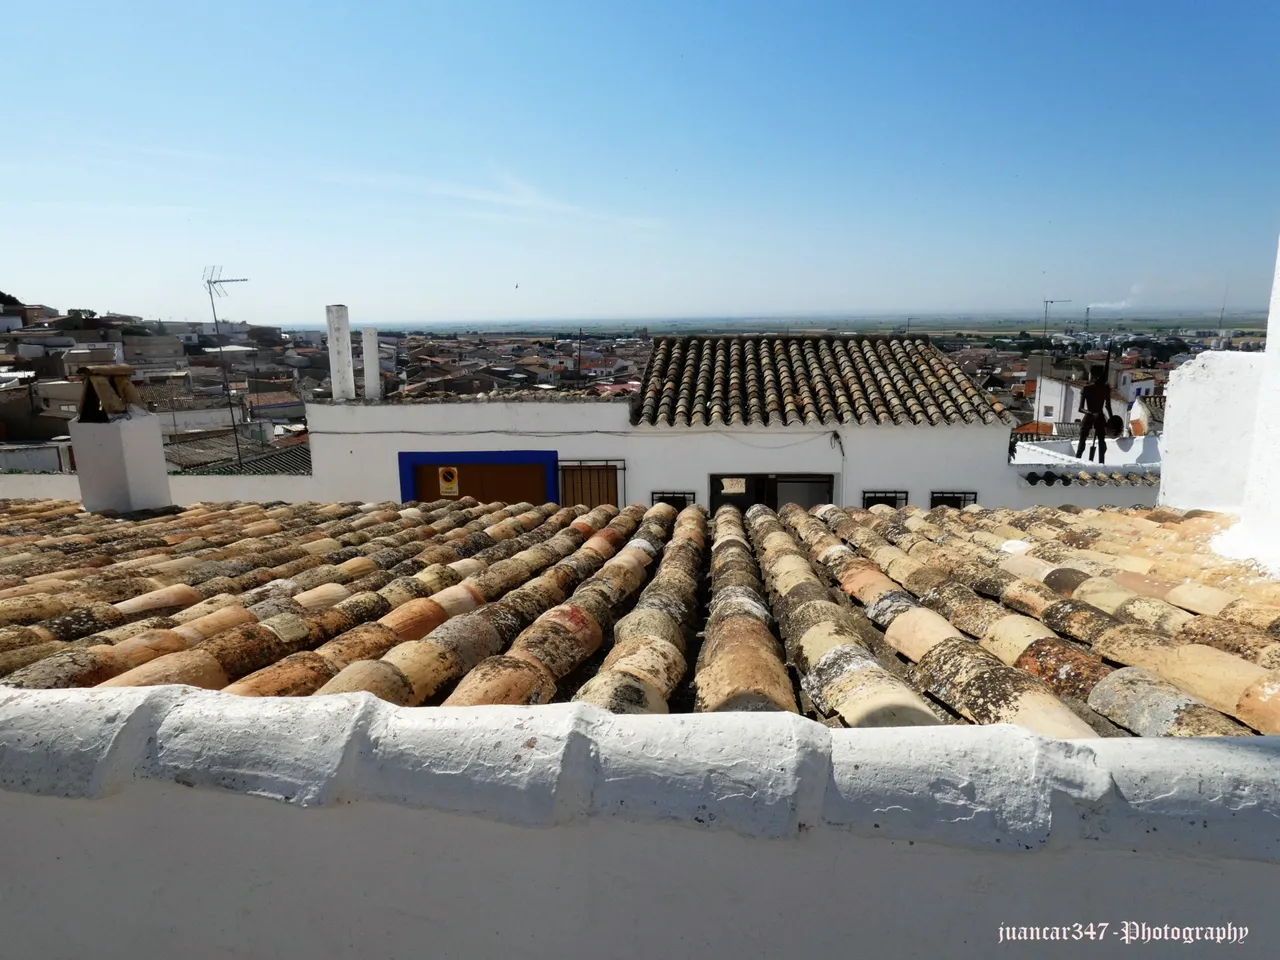 On the rooftops of the Albaicín